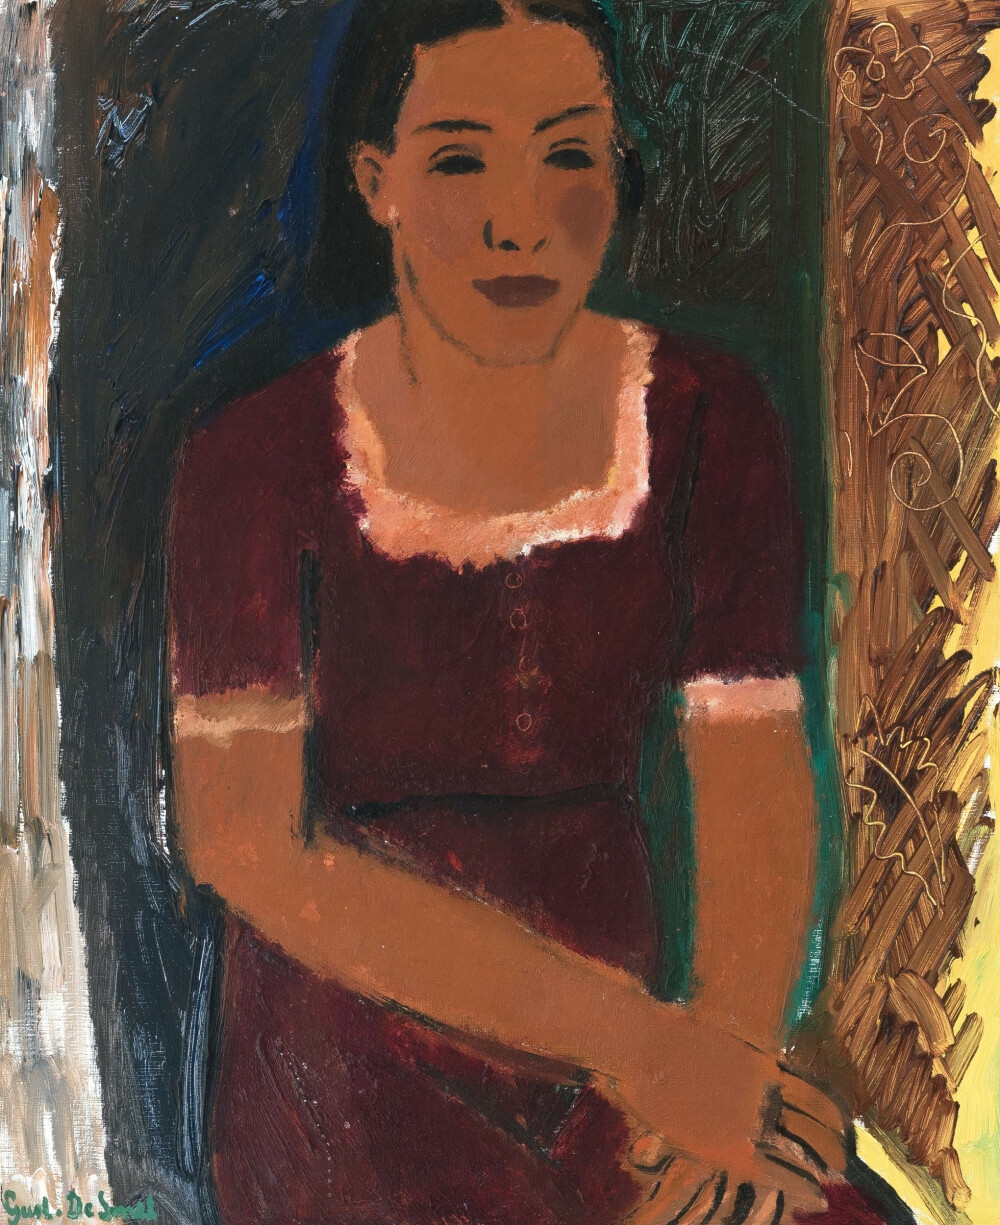 Girl with red dress by Gustave de Smet, 1938